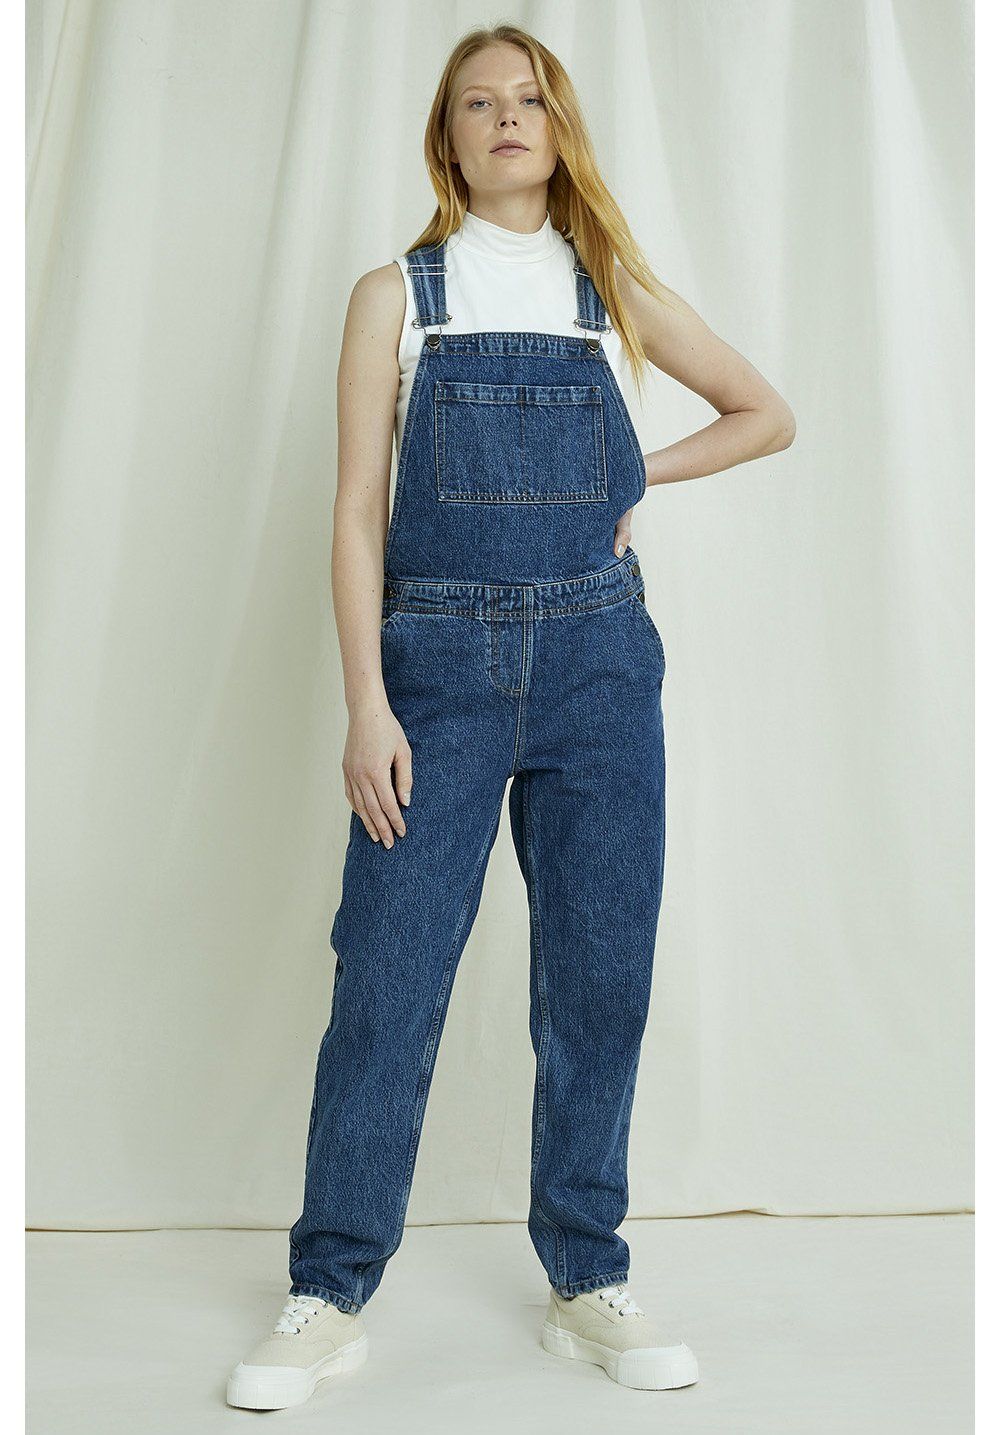 Buy Juniors High Neck T-shirt and Denim Dungarees Online for Girls |  Centrepoint Oman